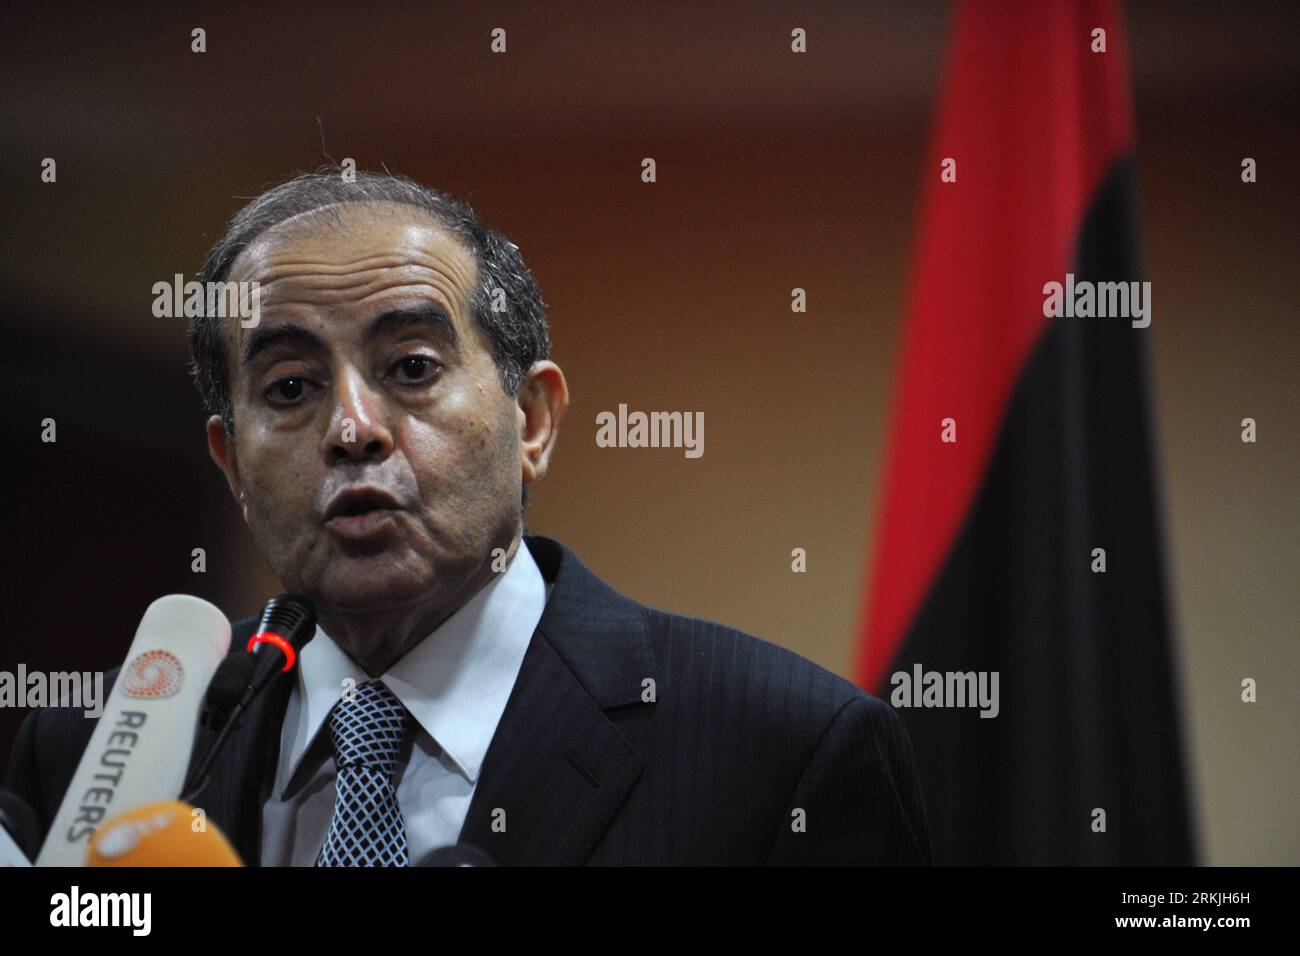 Bildnummer: 56136862  Datum: 29.09.2011  Copyright: imago/Xinhua (110929) -- TRIPOLI, Sept. 29, 2011 (Xinhua) -- Mahmoud Jibril, chairman of the executive office of Libya s National Transitional Council (NTC), speaks during a press conference in Tripoli, Libya, Sept. 29, 2011. The ruling authorities will postpone the formation of an interim government until the entire Libya is without redoubts of fallen leader, Jibril confirmed here on Thursday. (Xinhua/Li Muzi) LIBYA-TRIPOLI-PRESS CONFERENCE-JIBRIL PUBLICATIONxNOTxINxCHN People Politik Porträt xns x1x 2011 quer     56136862 Date 29 09 2011 Co Stock Photo